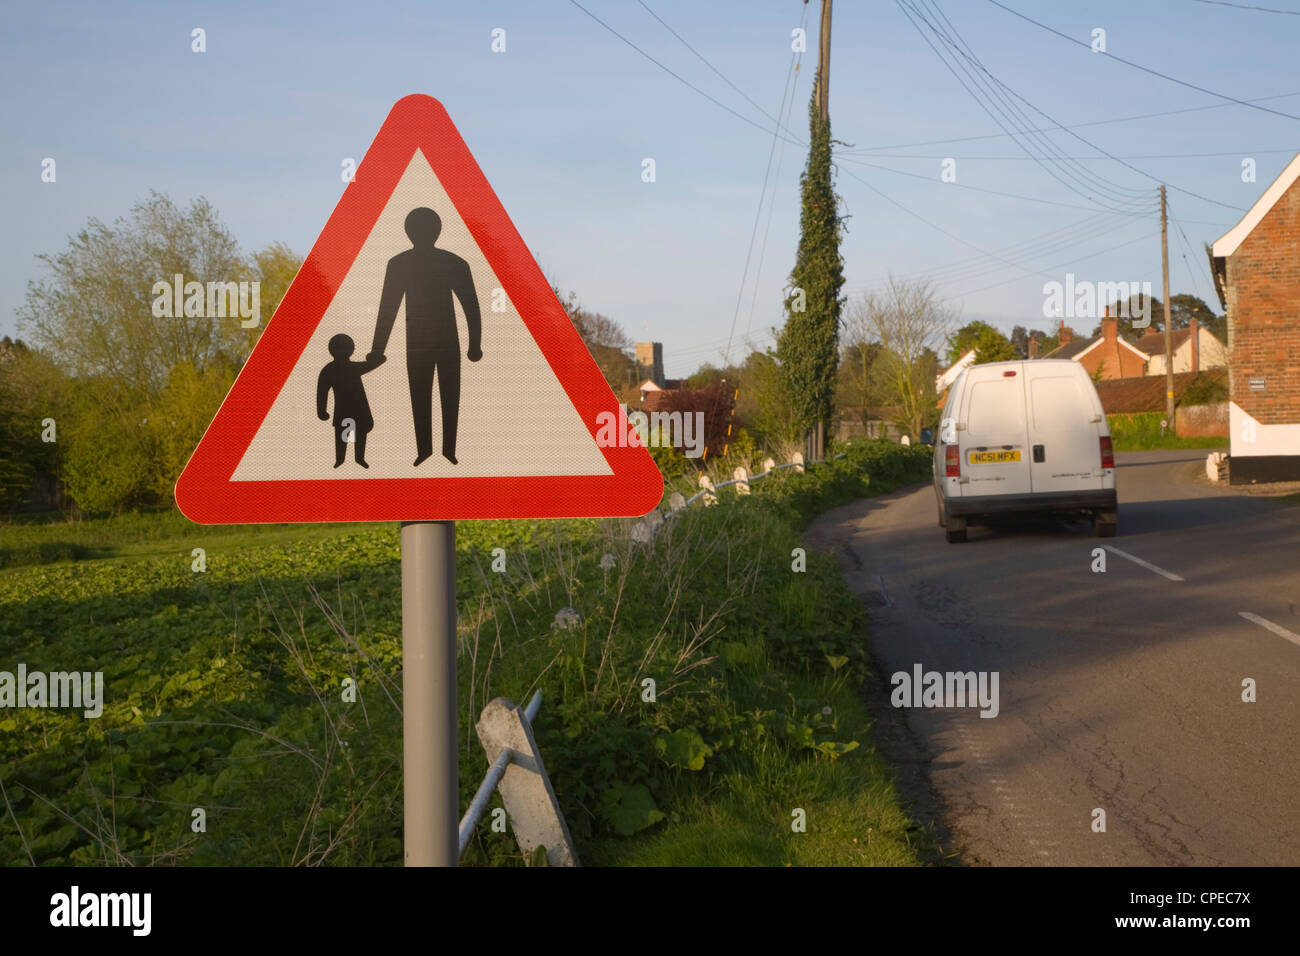 Road sign of adult and child holding hands warns of no pedestrian path through village, Shottisham, Suffolk, England Stock Photo